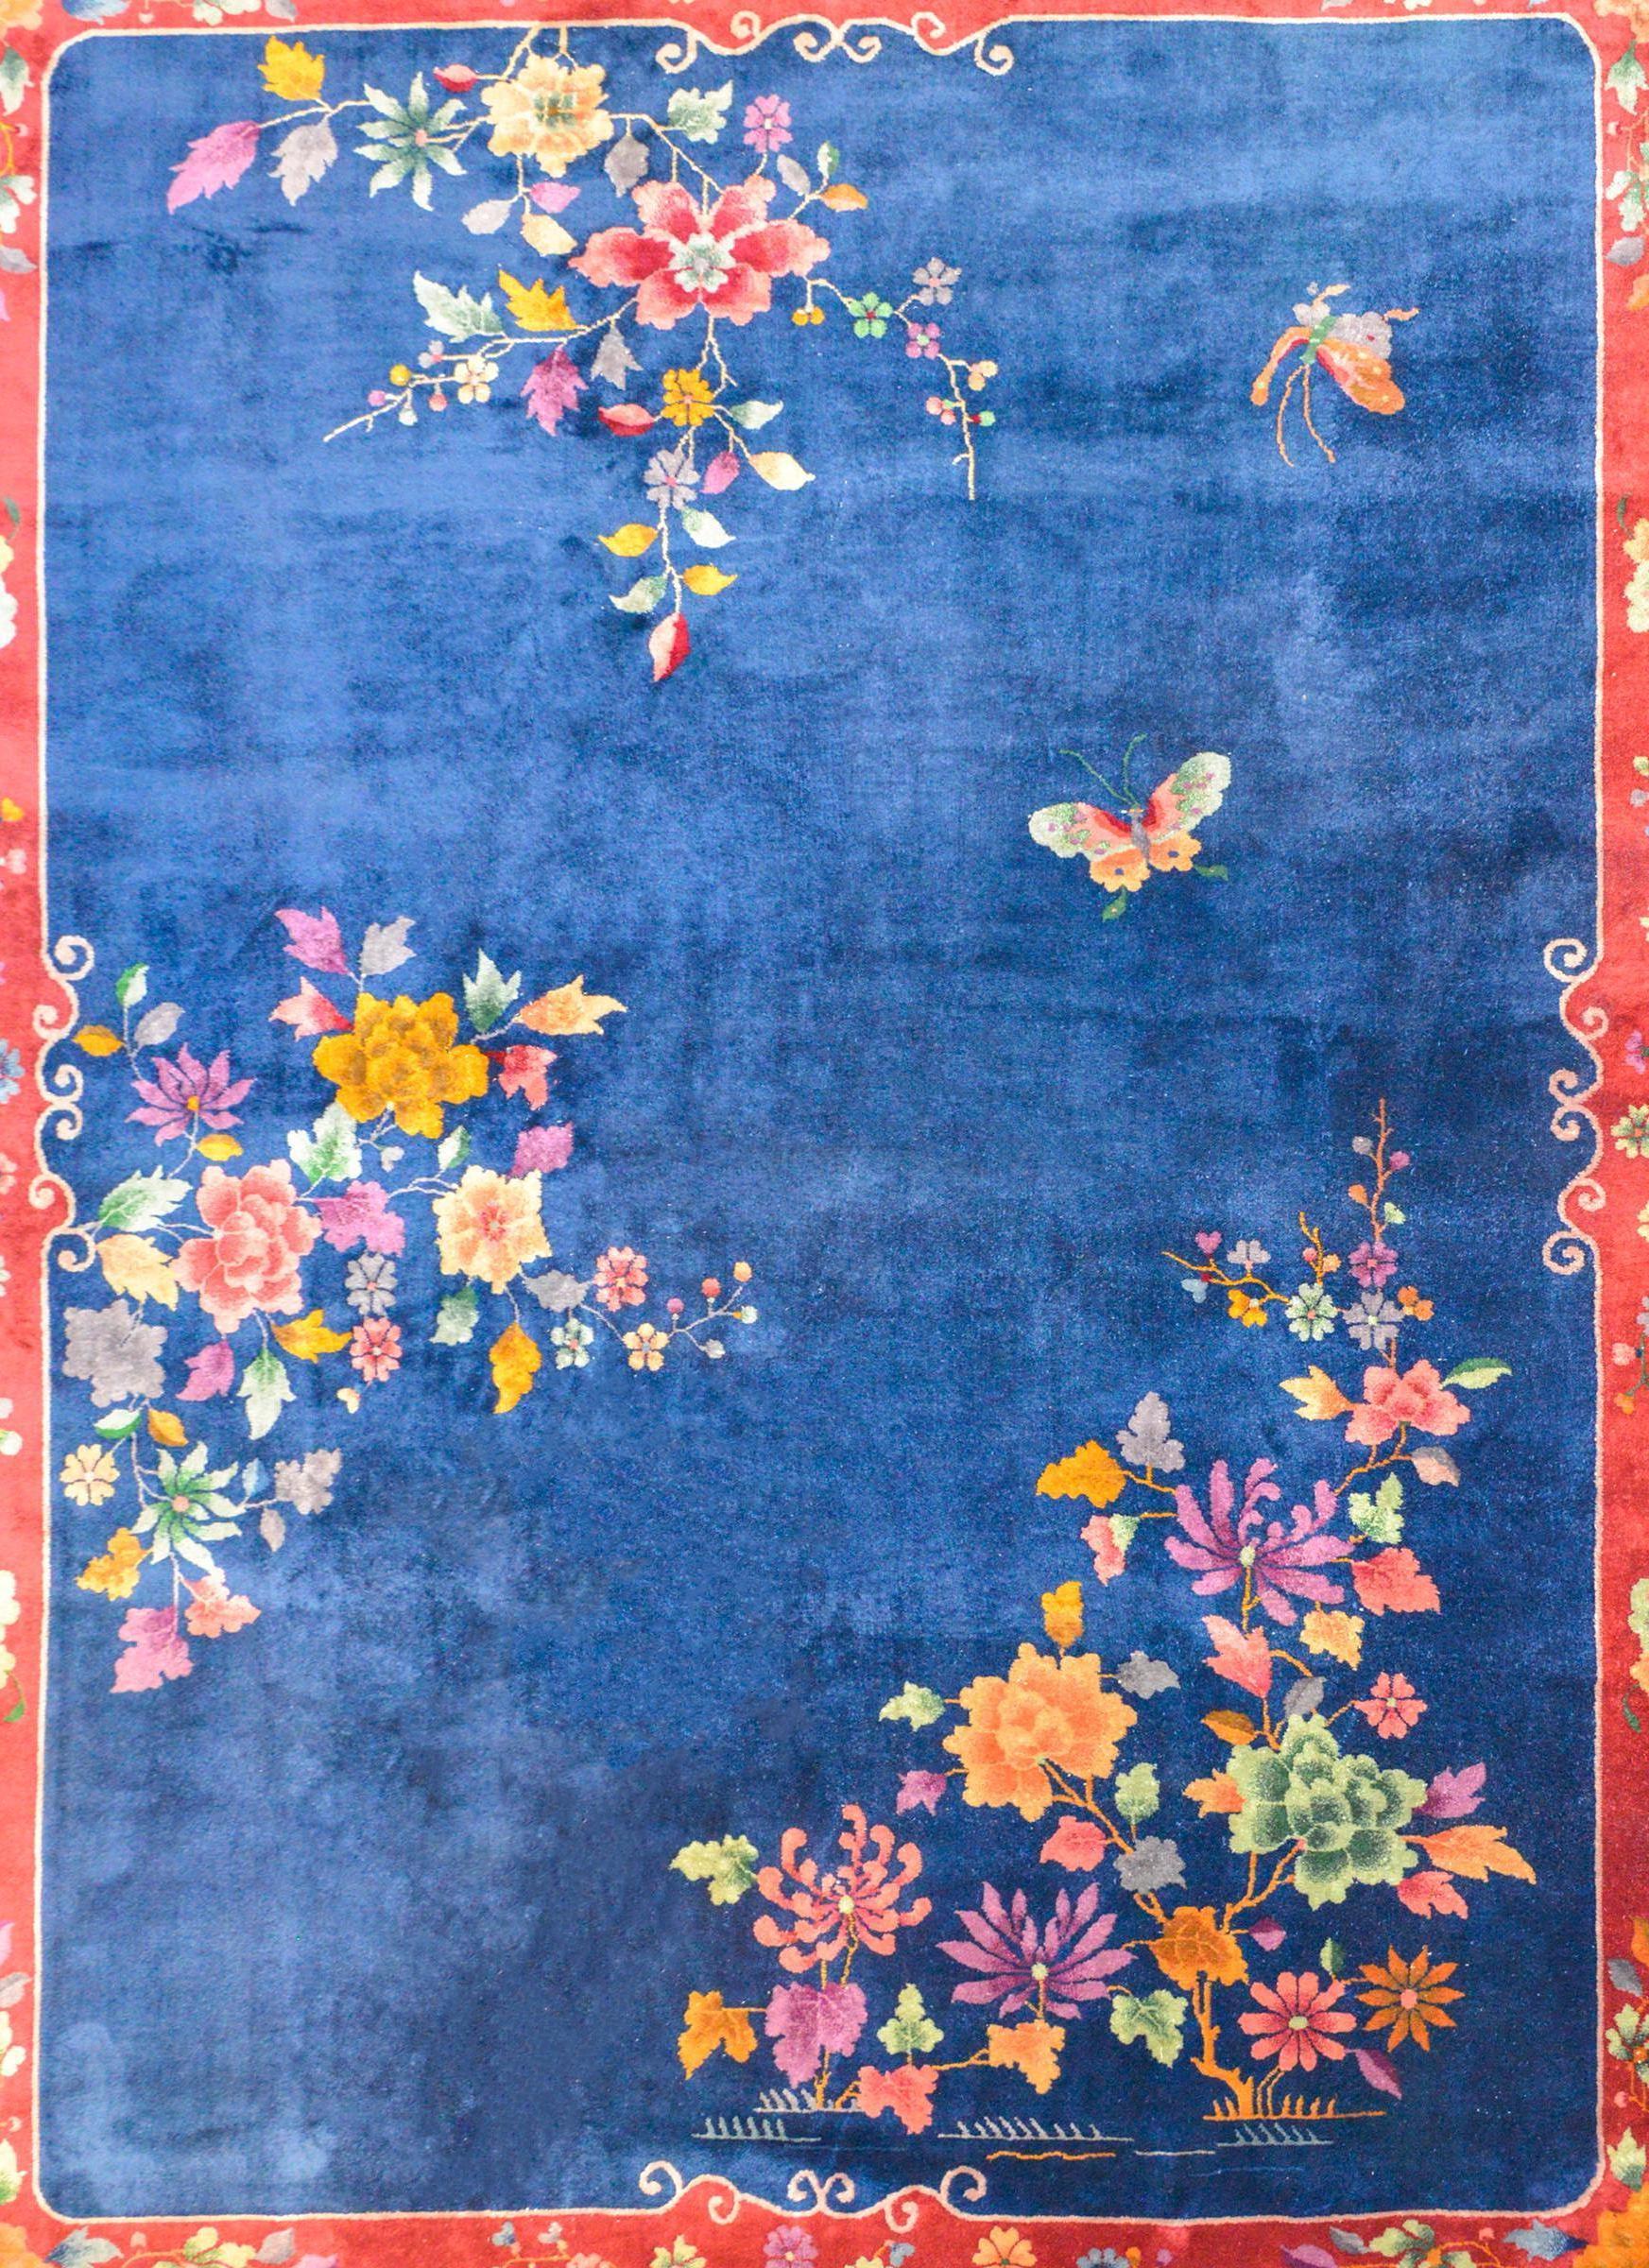 A gorgeous early 20th century Chinese Art Deco rug with a bold dark indigo field surrounded by a wide cranberry border with scrolled lines. Clusters of bight multicolored peonies, chrysanthemum, and cherry blossoms dot the field, while a pair of